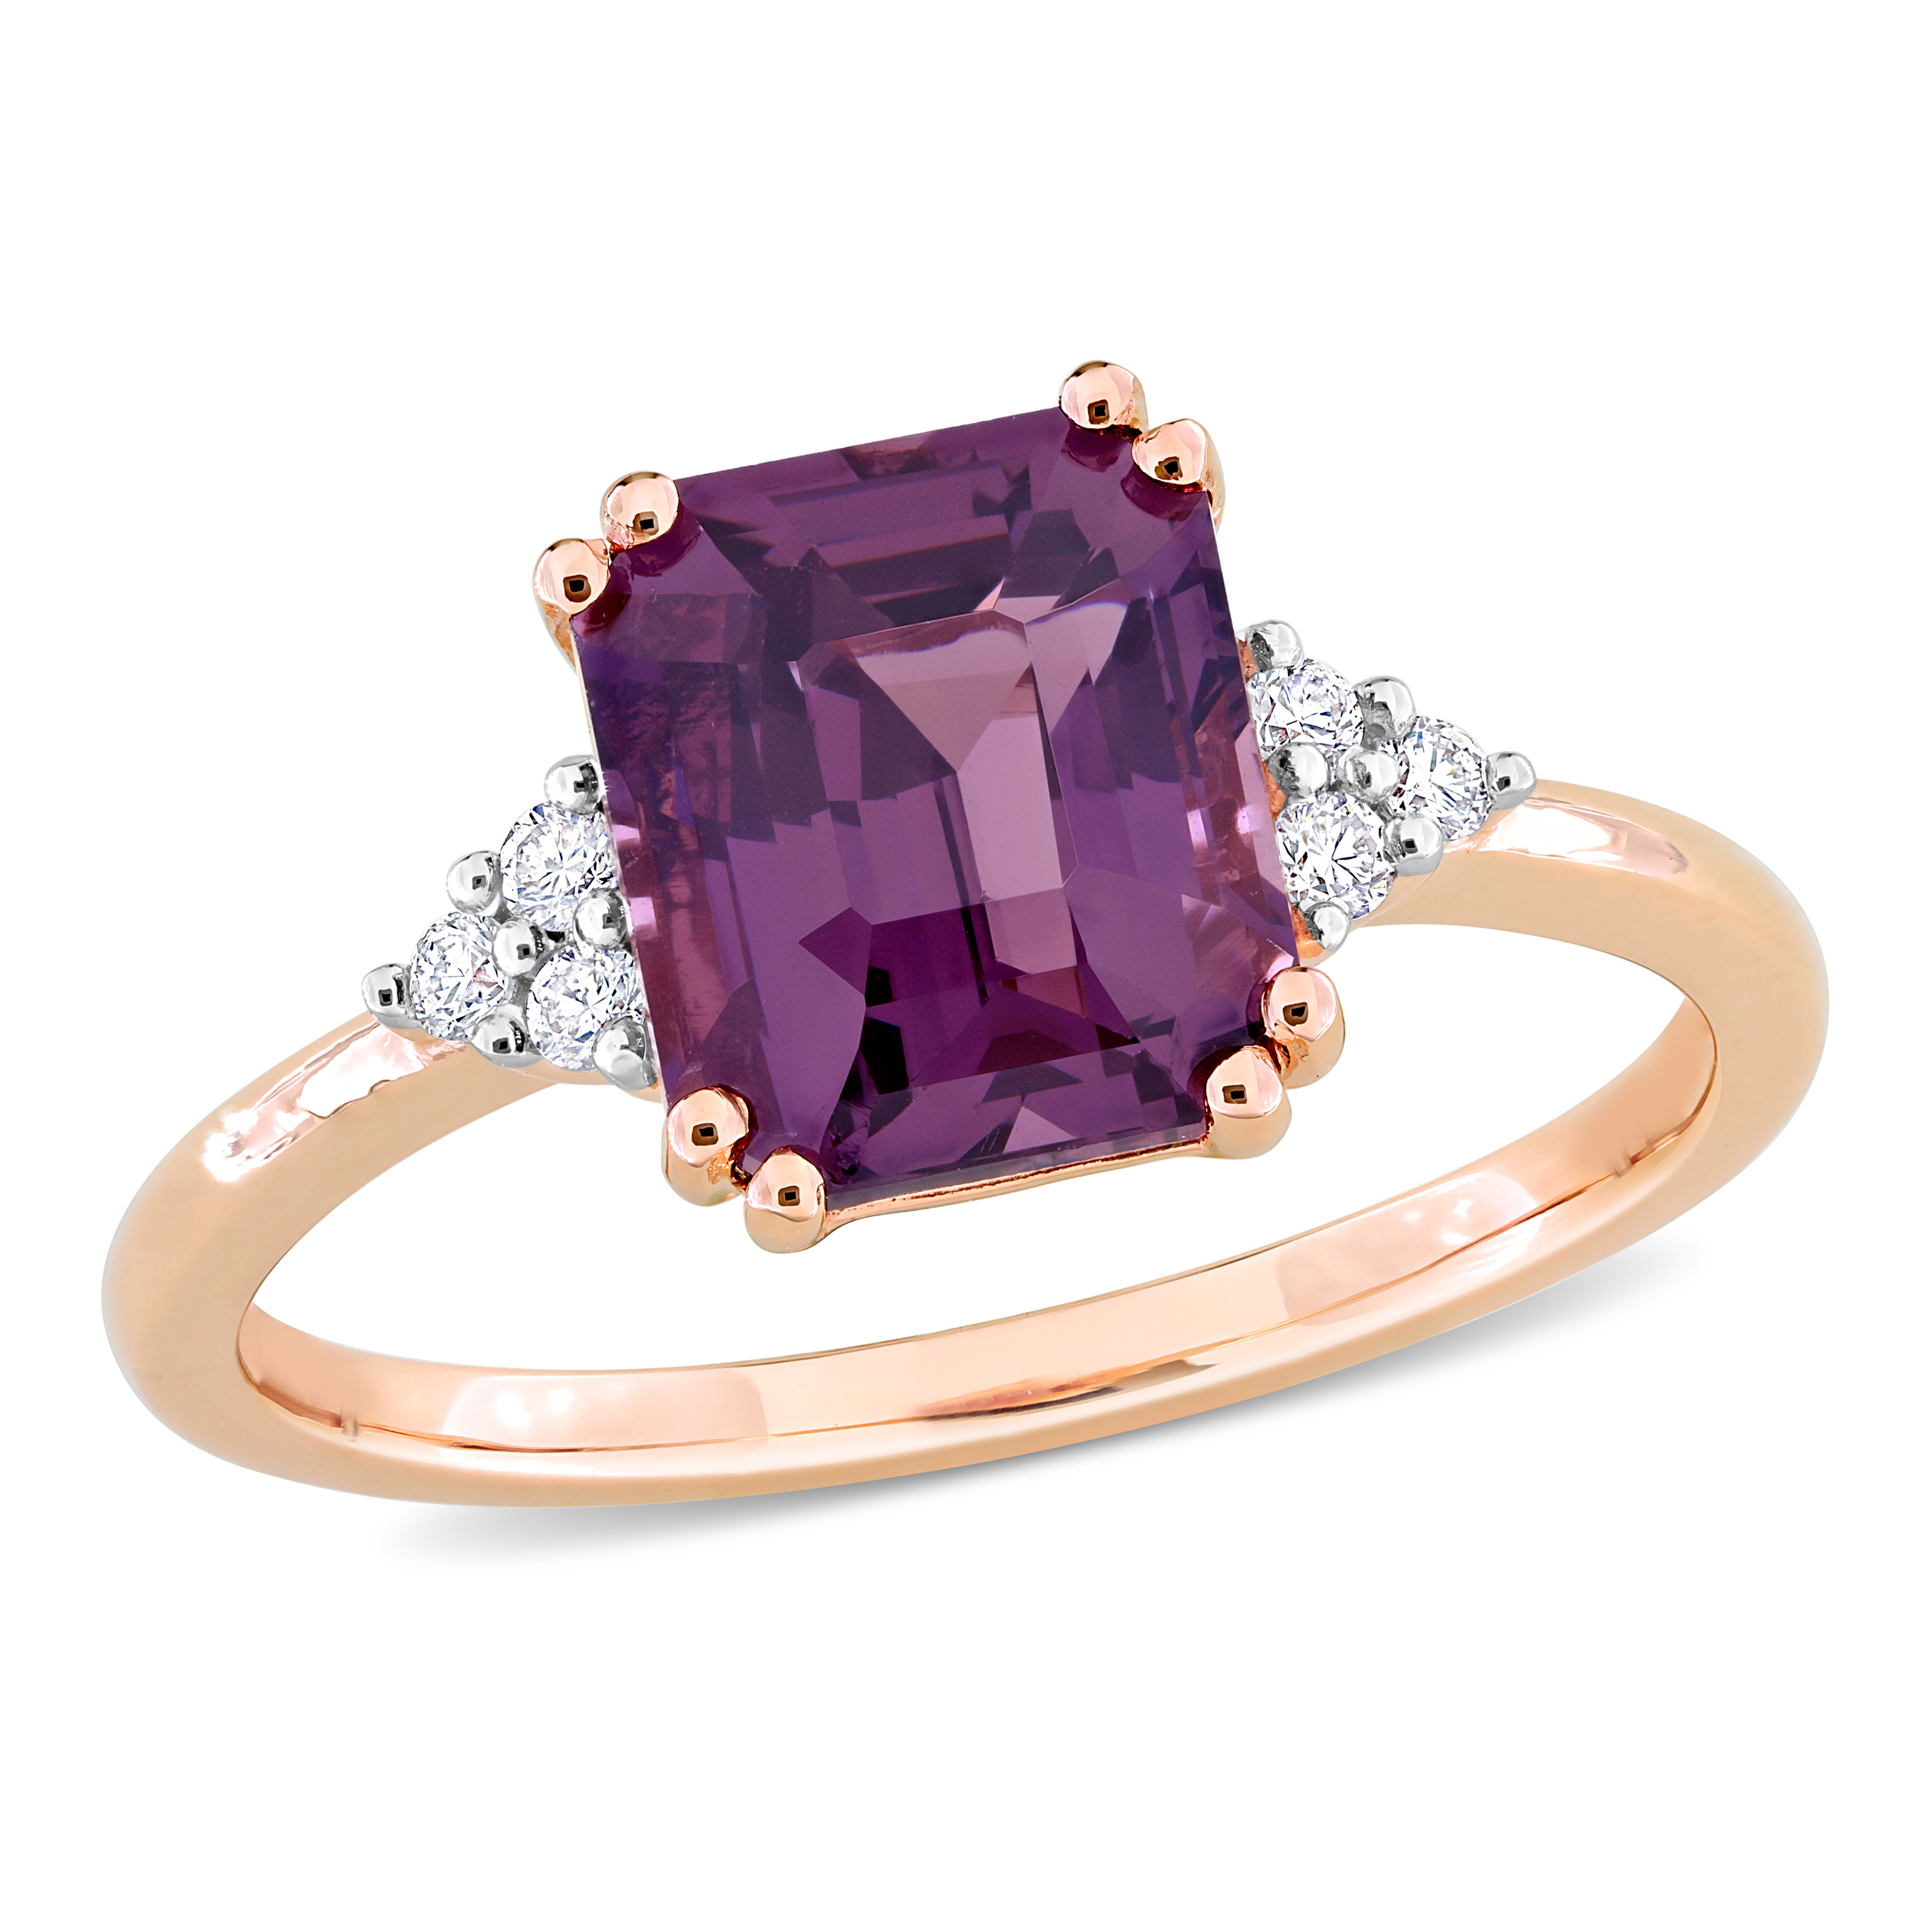 3 CT TGW Octagon-Cut Violet Spinel and 1/10 CT TDW Diamond Cocktail Ring in 14k Rose Gold